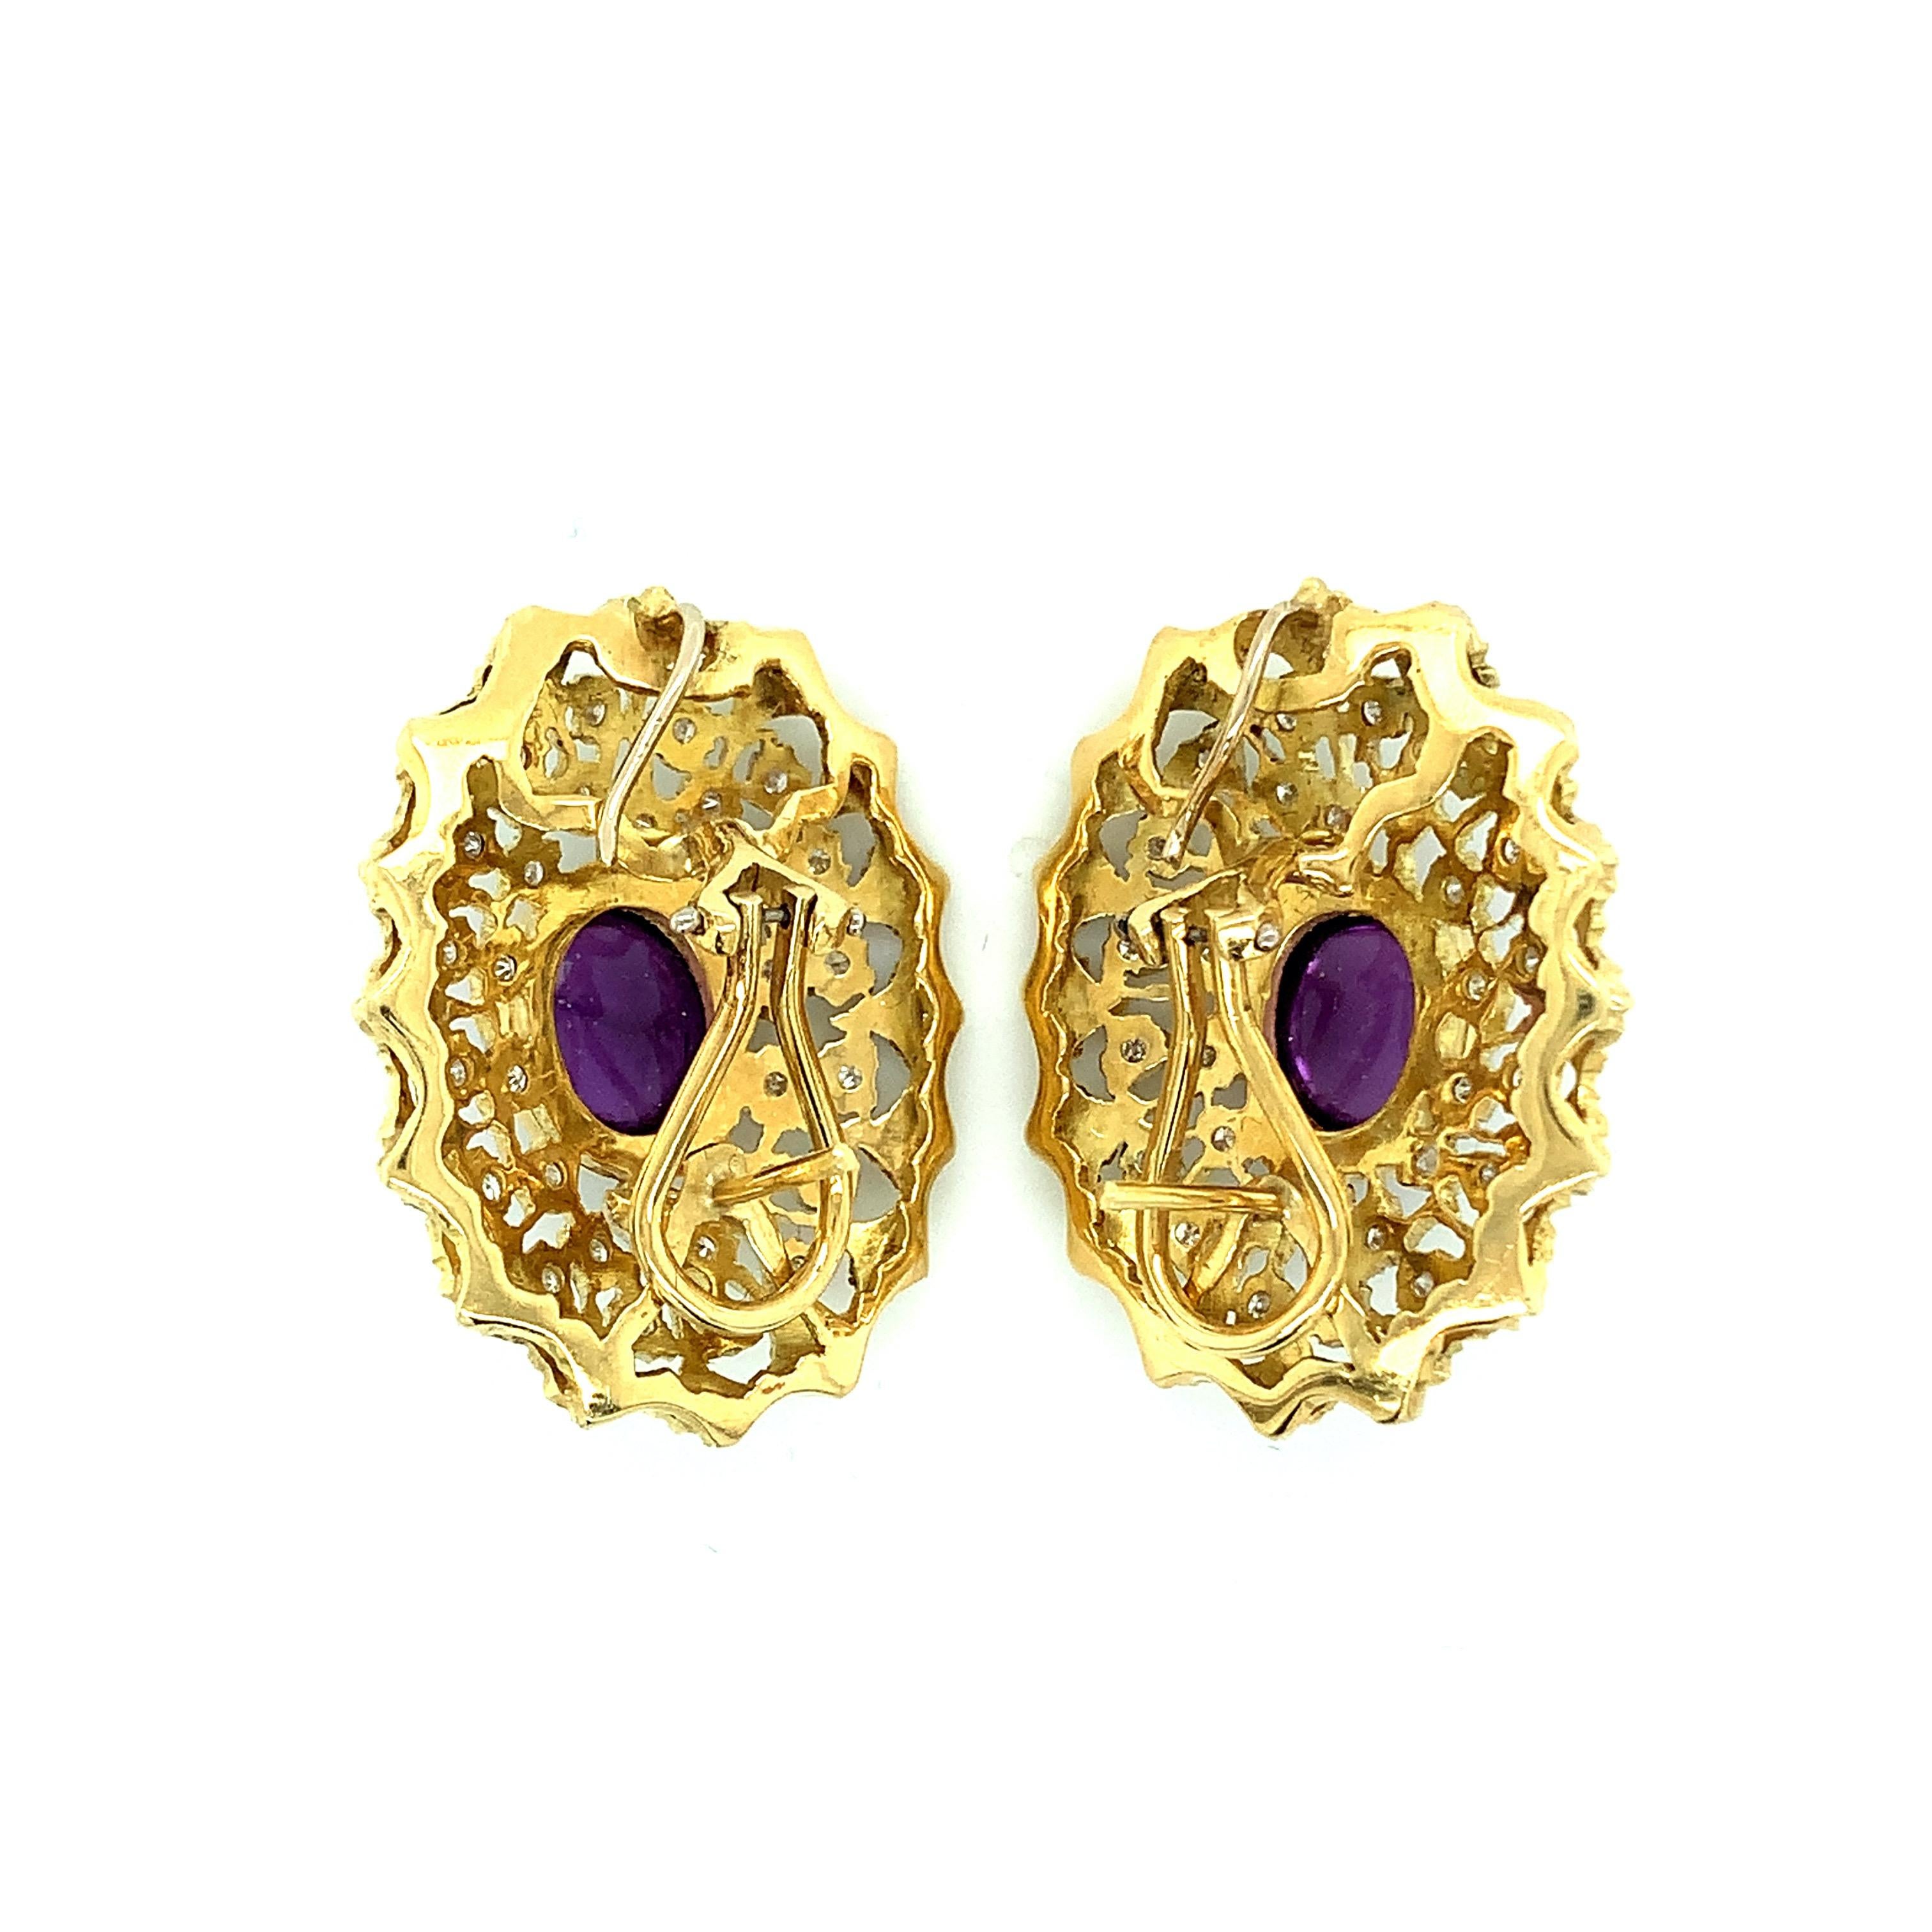 A pair of oval shaped earrings featuring round cut diamonds and a cabochon amethyst at the center. Set in 18 karat yellow gold and white gold. The diamonds weigh approximately 2 carats and the amethysts weigh approximately 10 carats. Total weight: